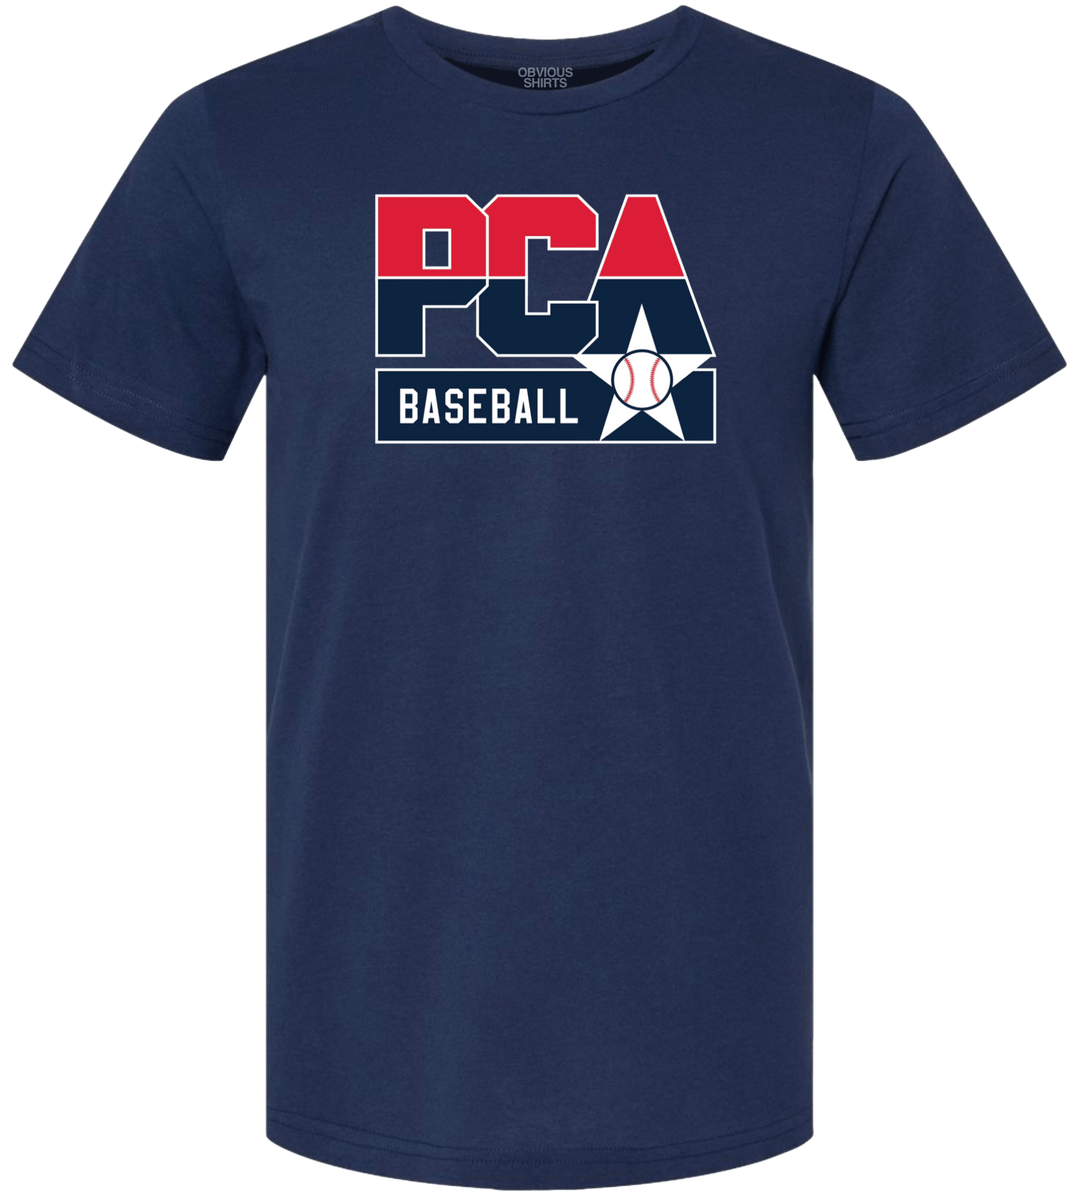 TEAM PCA. - OBVIOUS SHIRTS